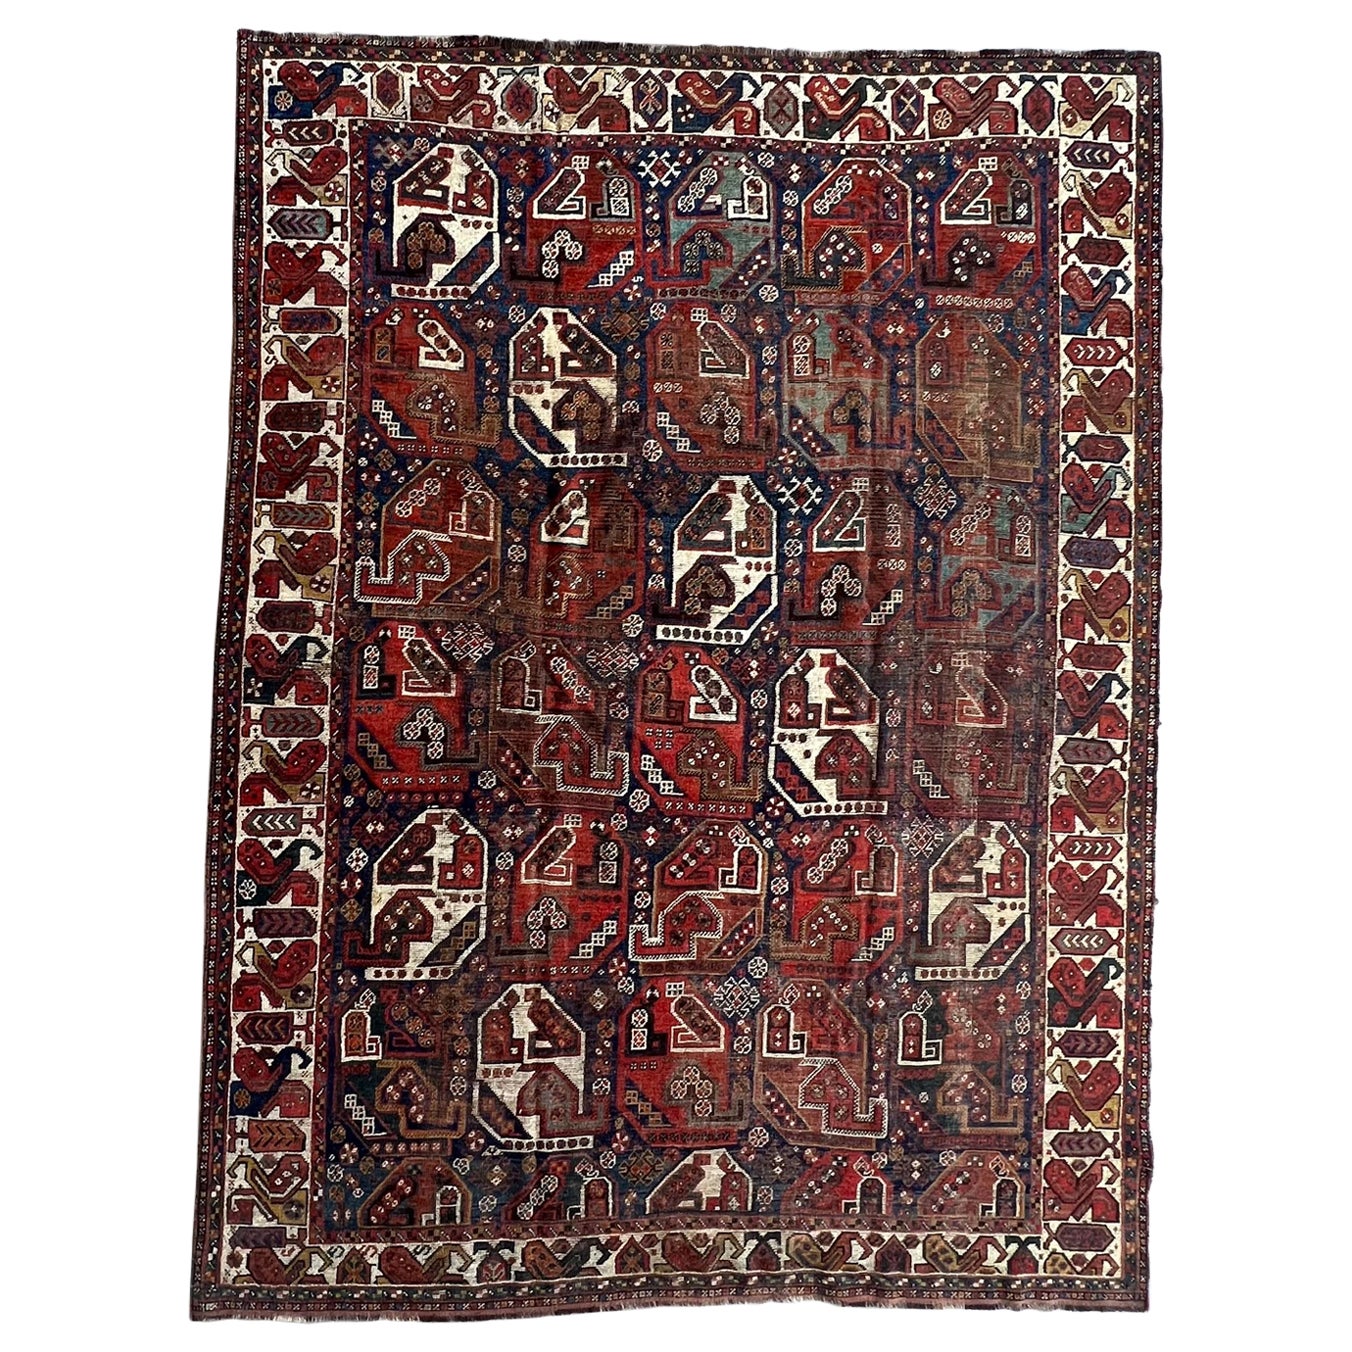 Antique Persian Tribal Shiraz Rug with a Repeating All over Pattern